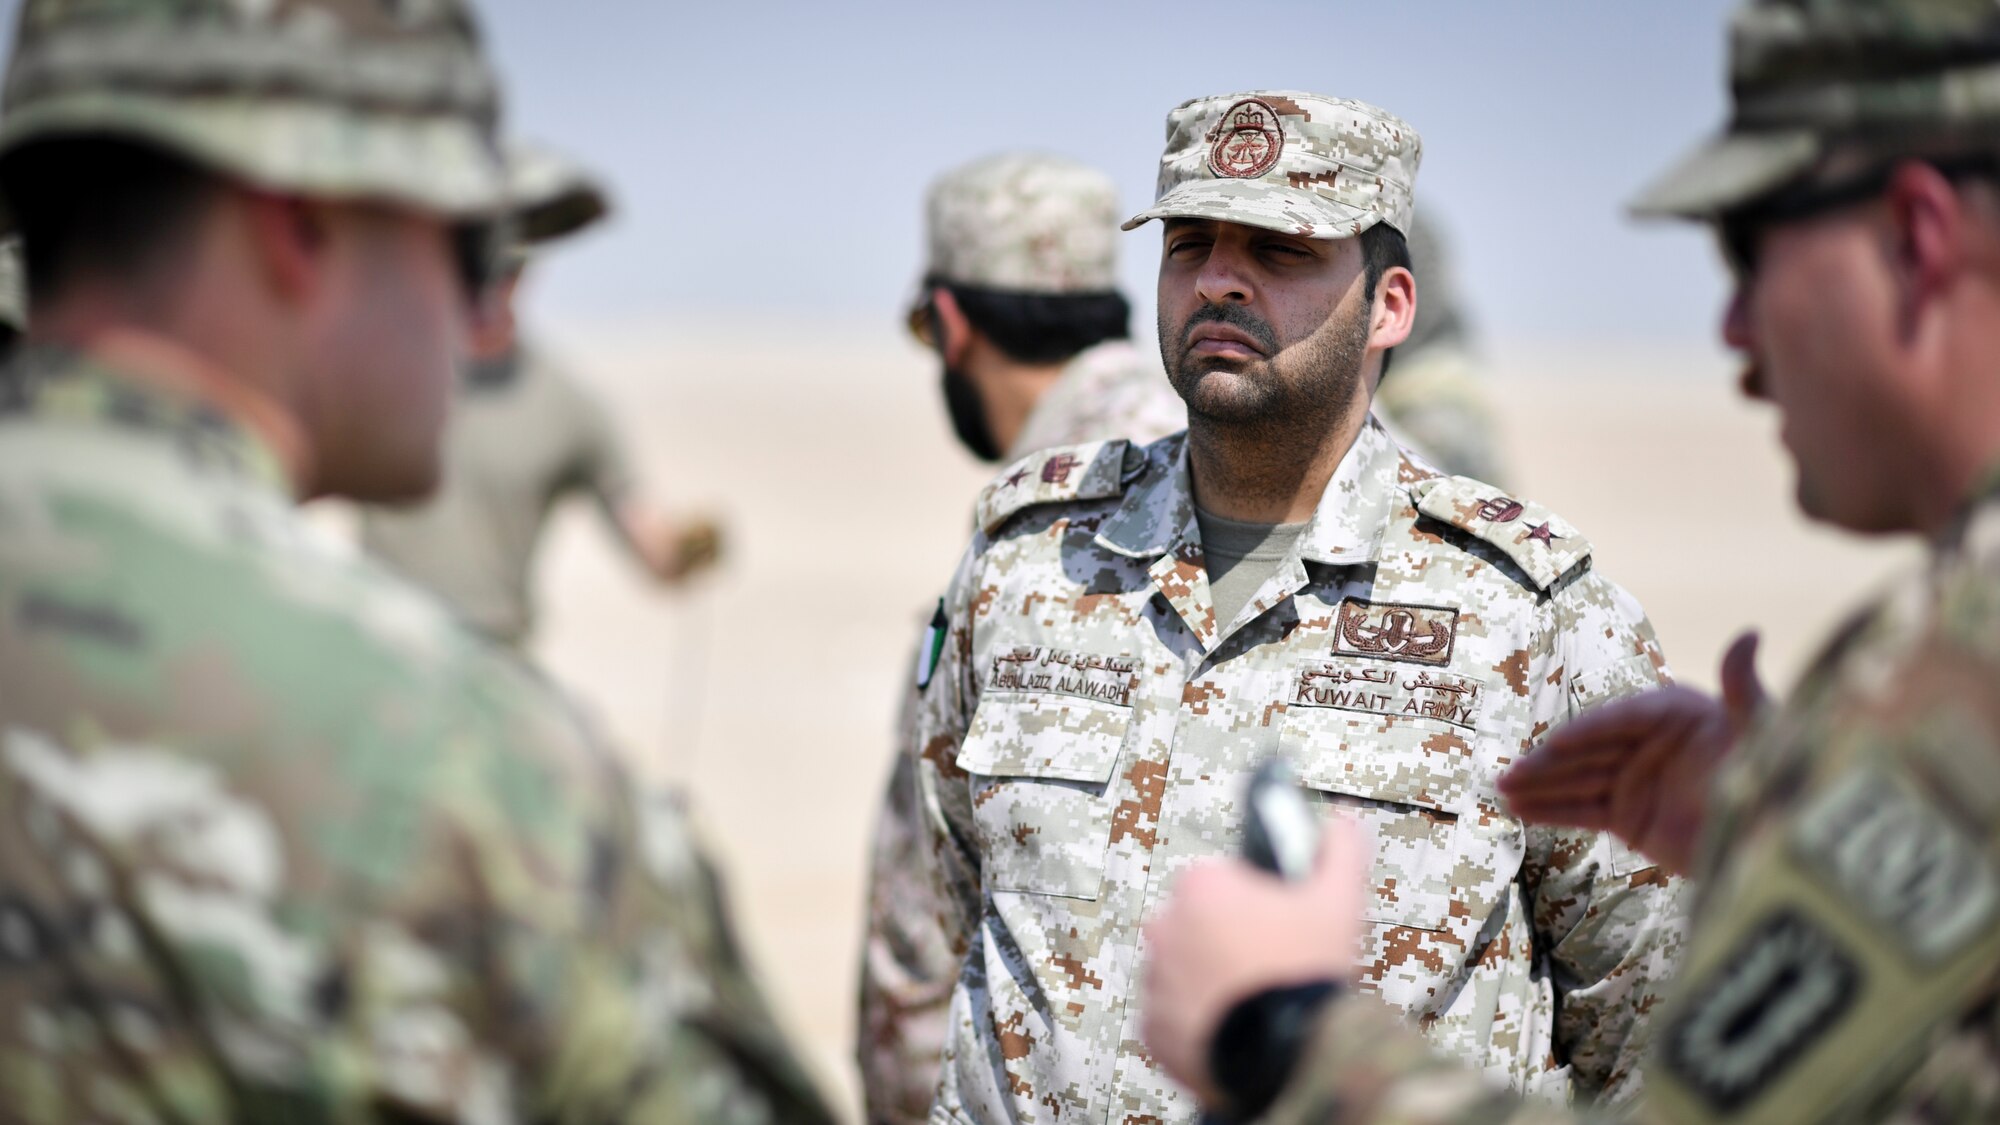 U.S. Army and Kuwaiti Ministry of Defense EOD technicians discuss insensitive high explosive munitions detonation techniques before a munitions disposal training at the Udari Range, Kuwait, Sept. 30, 2019. The training was designed for U.S. and Kuwaiti forces to share techniques, synchronize capabilities and build partnerships